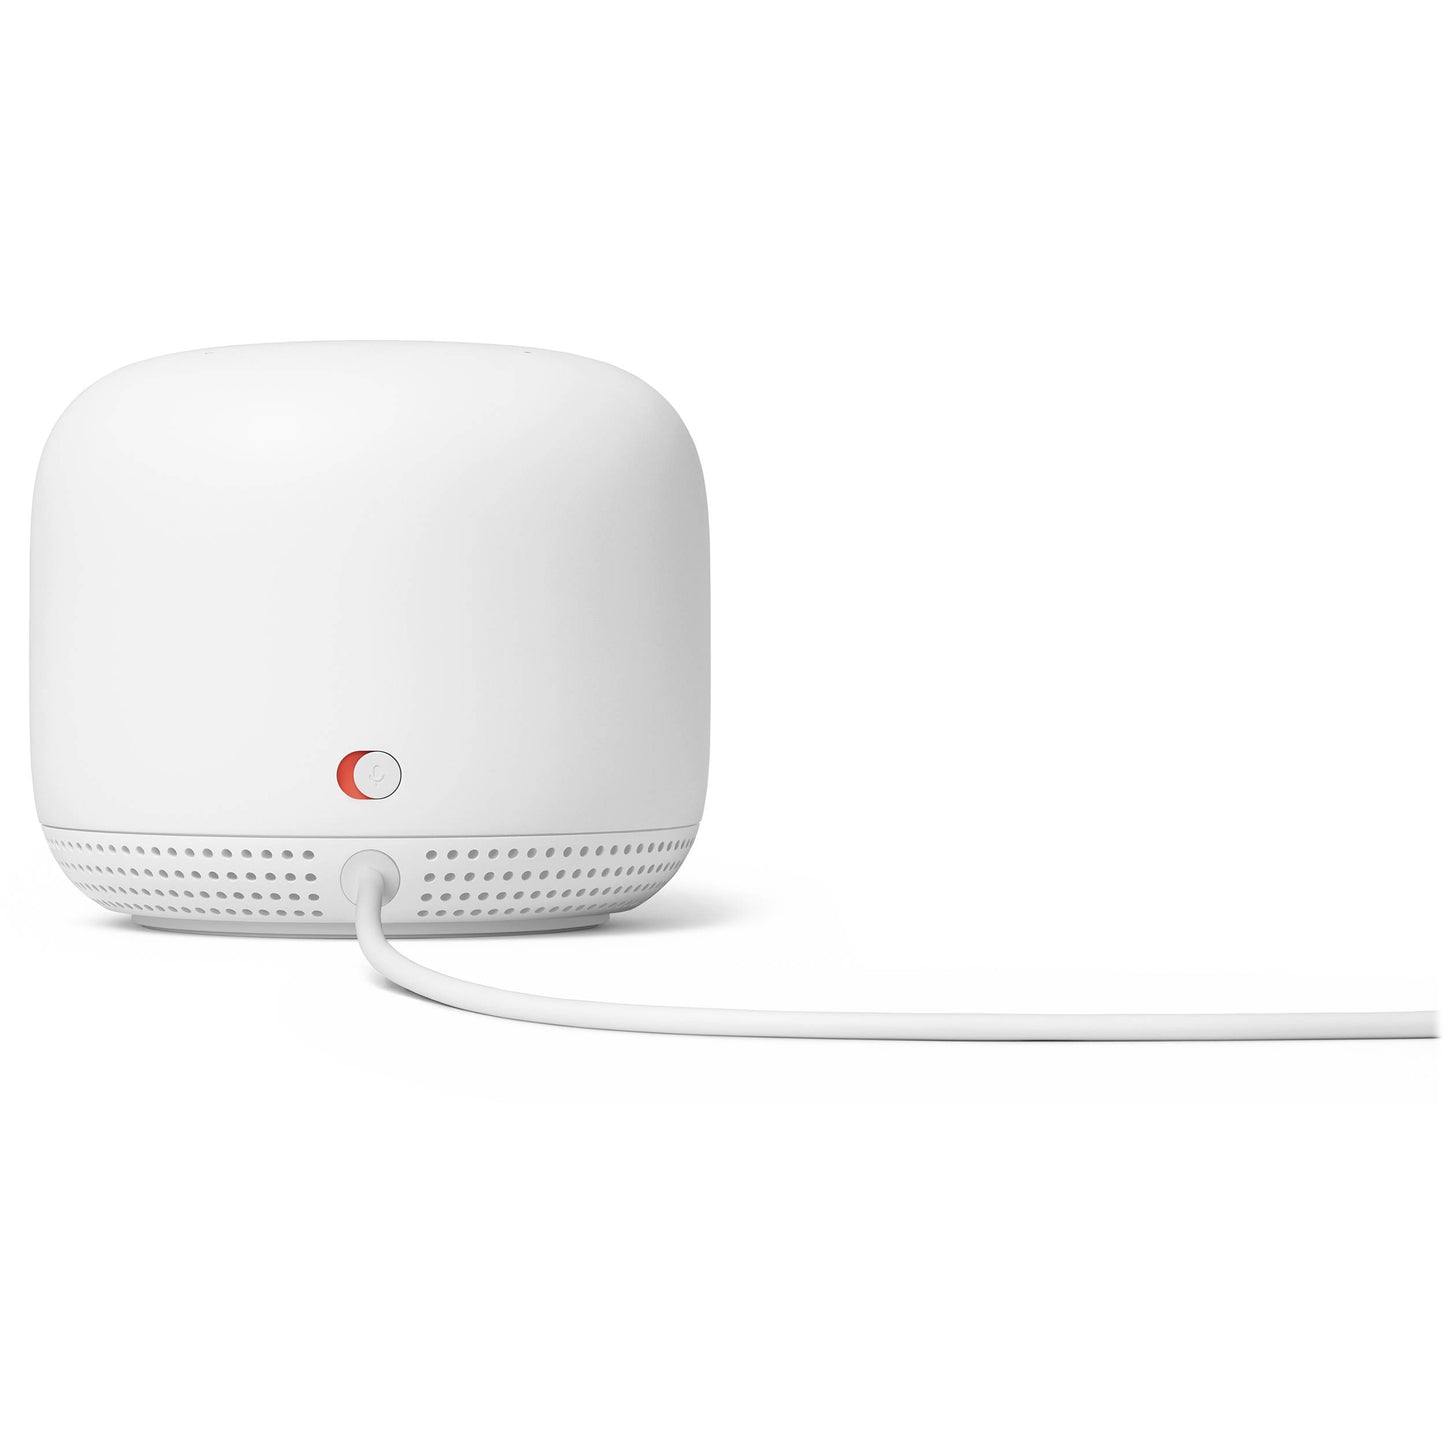 Google Nest Wifi Point (Snow) Wireless Network Range Repeater Extender 1600sq feet with Google Assistant Security Updates Bluetooth Speaker